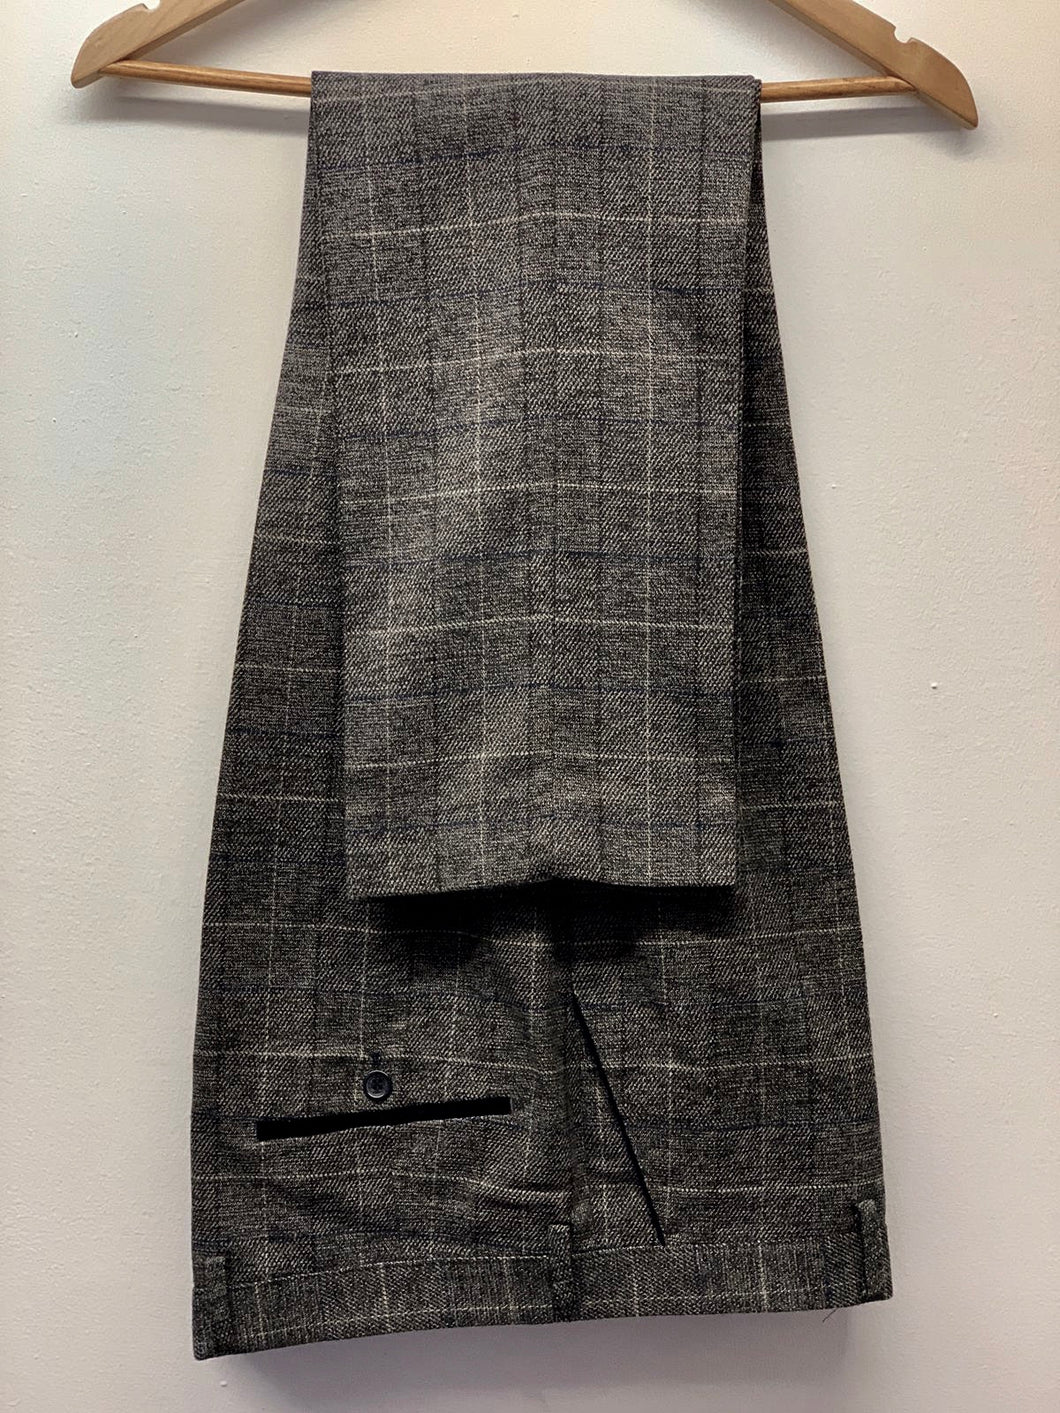 Marc Darcy Scott Grey Tweed Trousers hung up. Perfect menswear for office or formal attire